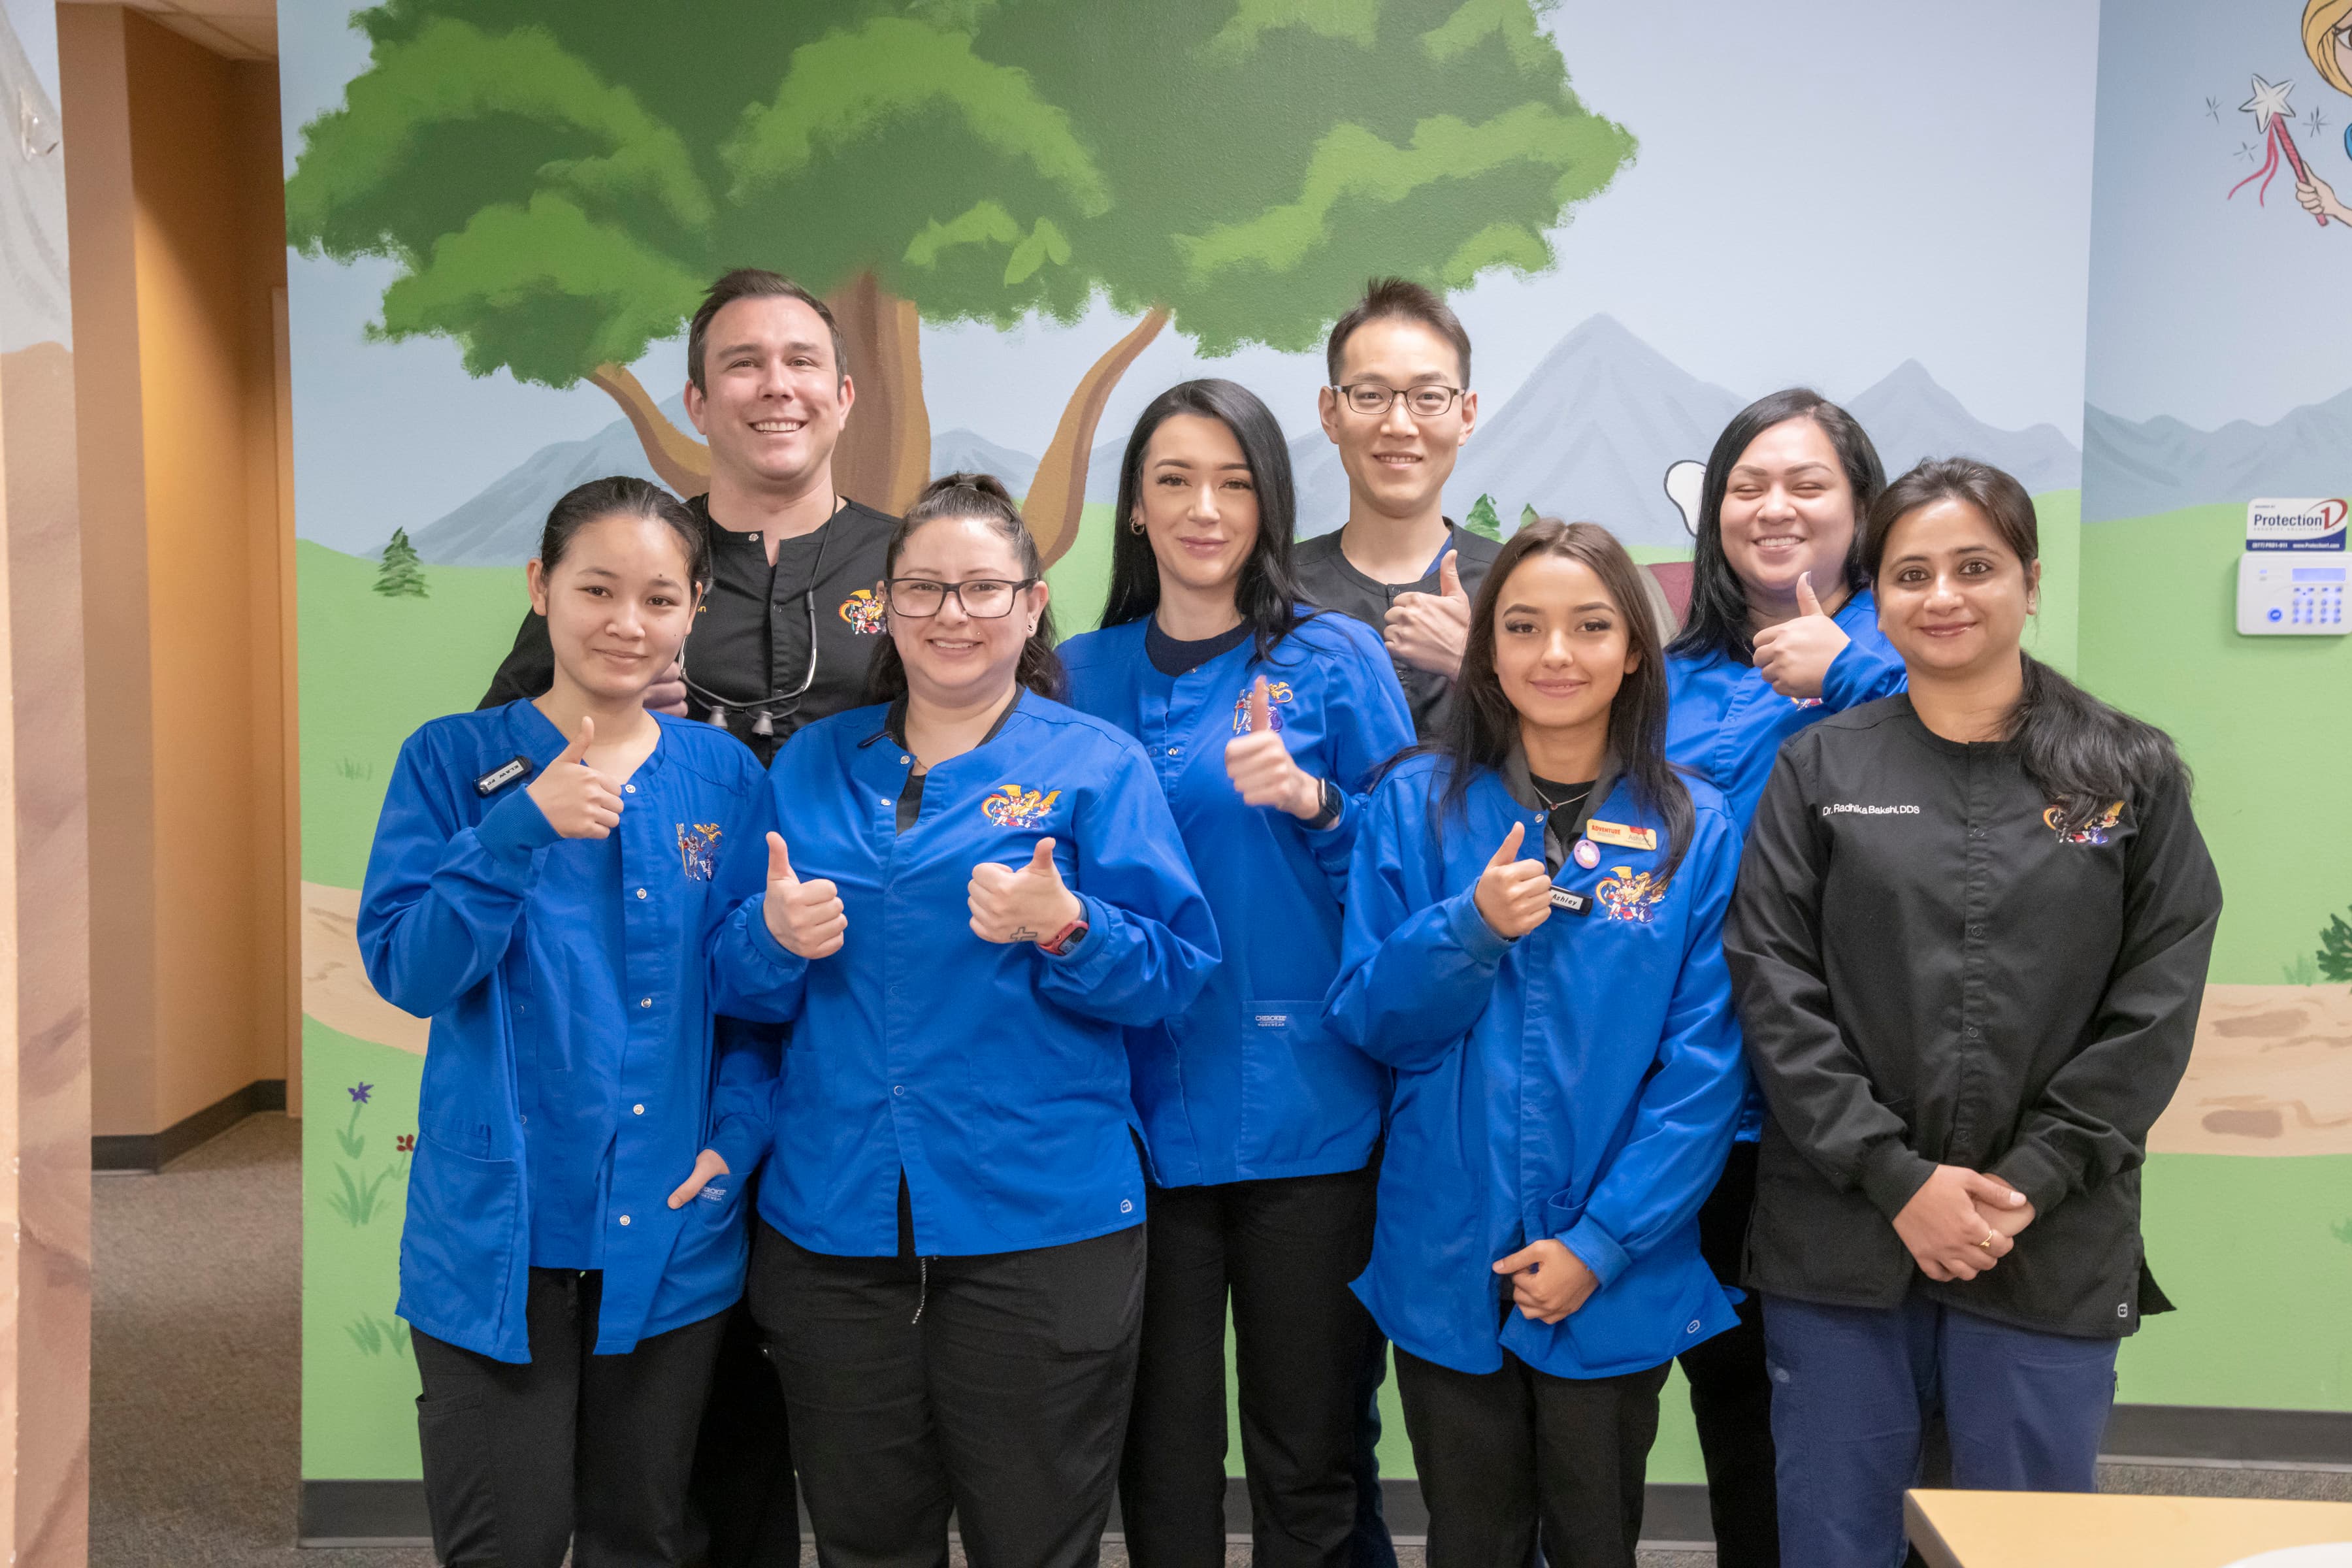 Pediatric Dental, vison and orthodontic staff at Aurora Adventure Dental location , eight people wearing blue medical coats, smiling and waving.